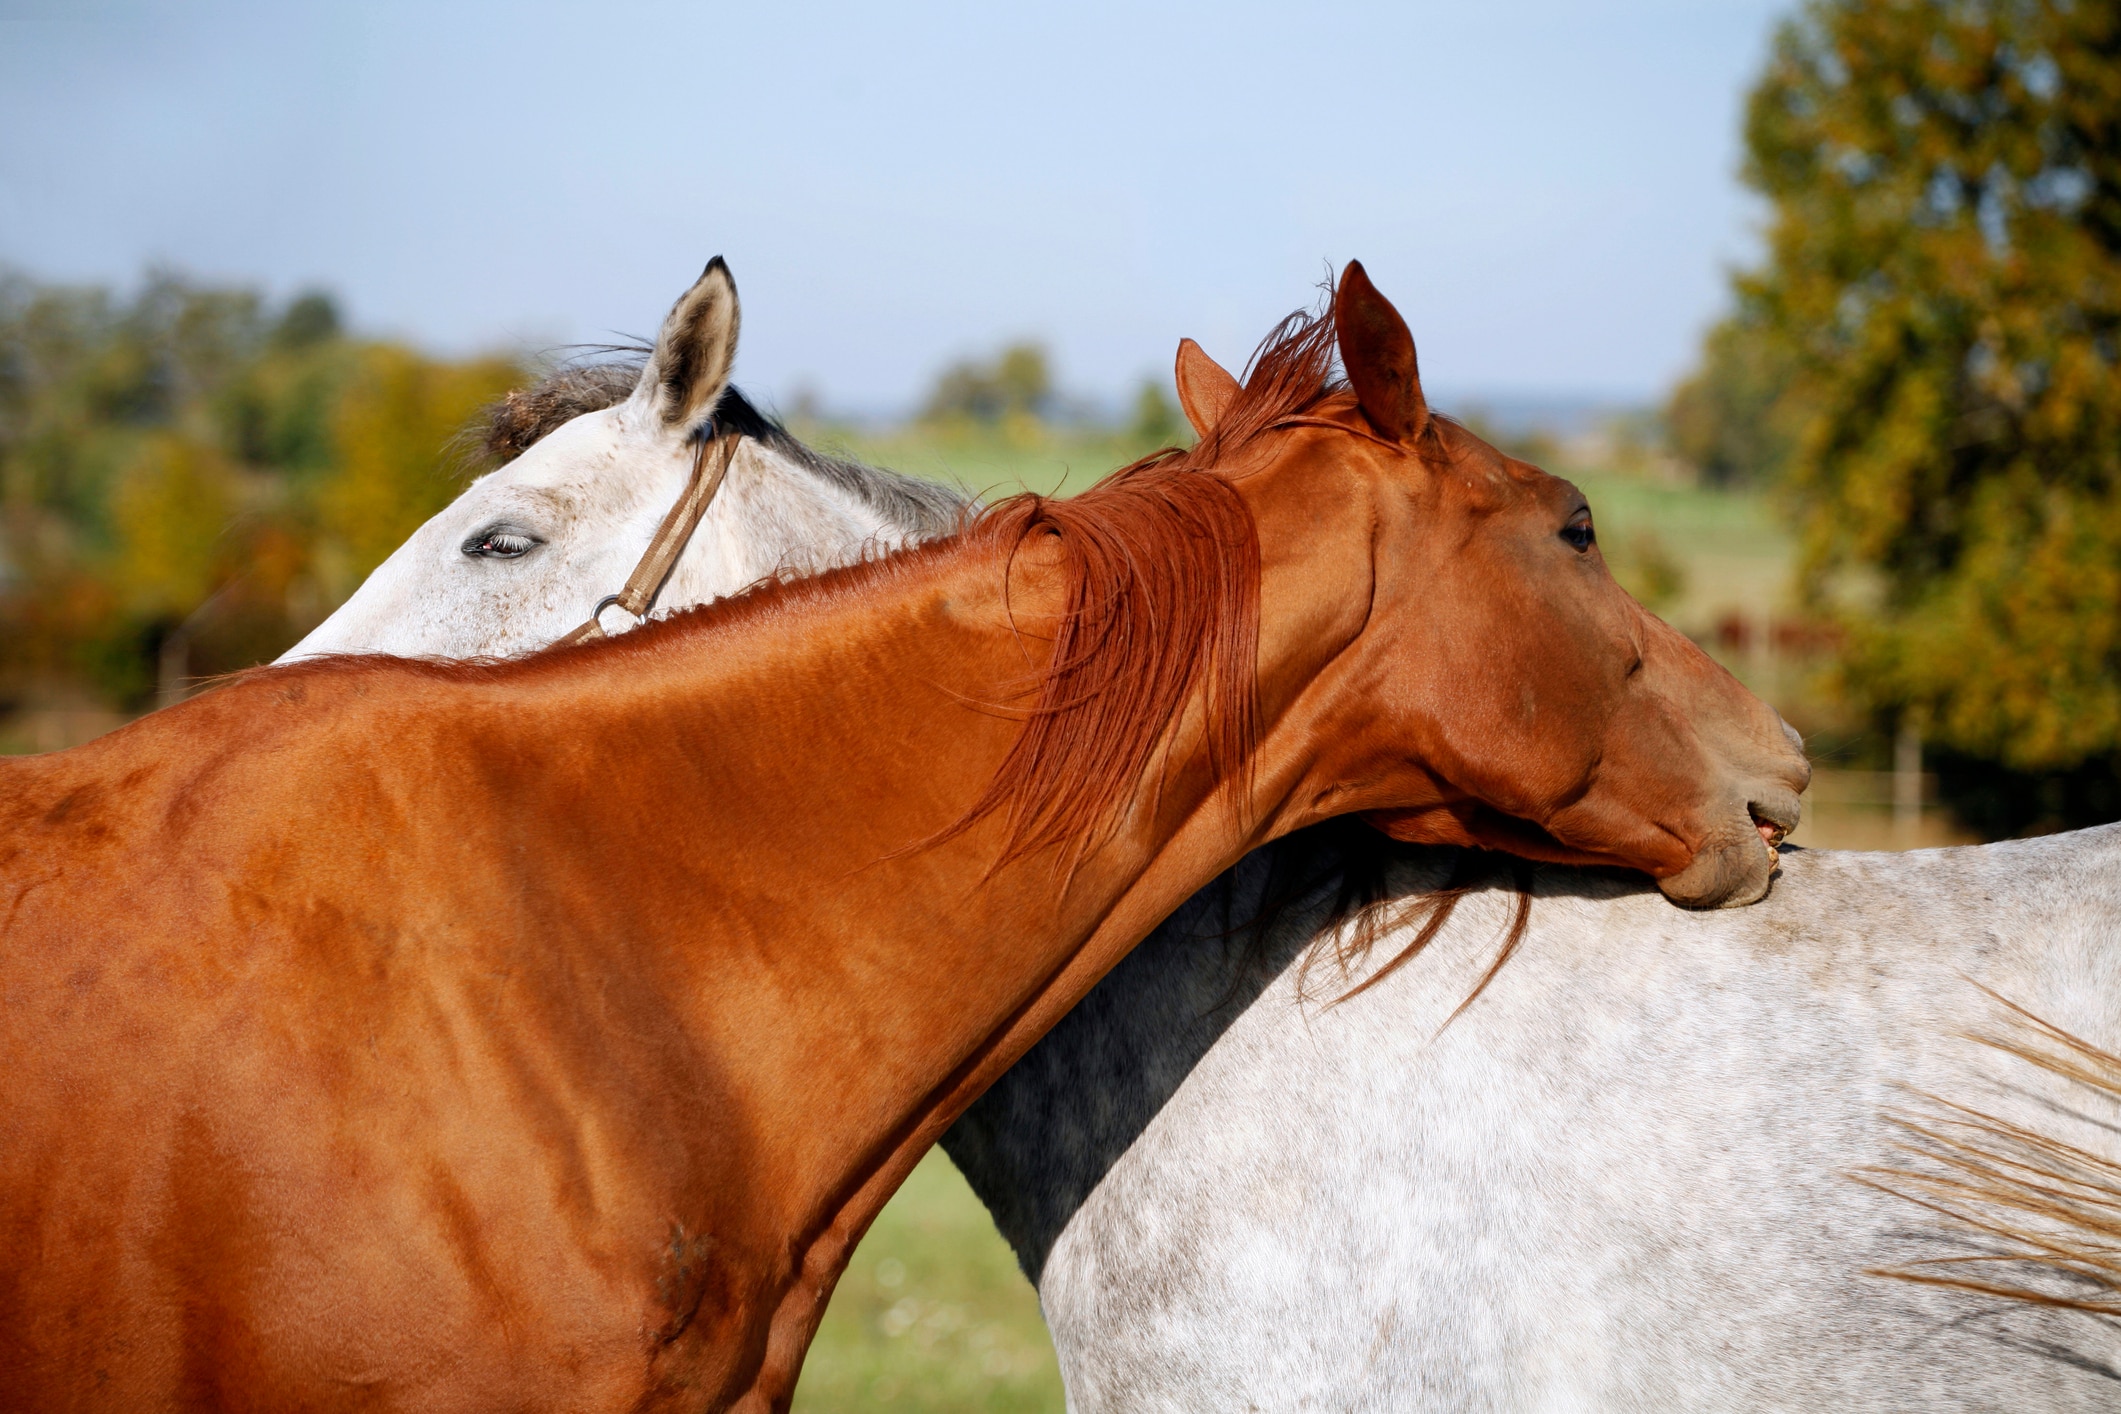 Two horses grooming each other